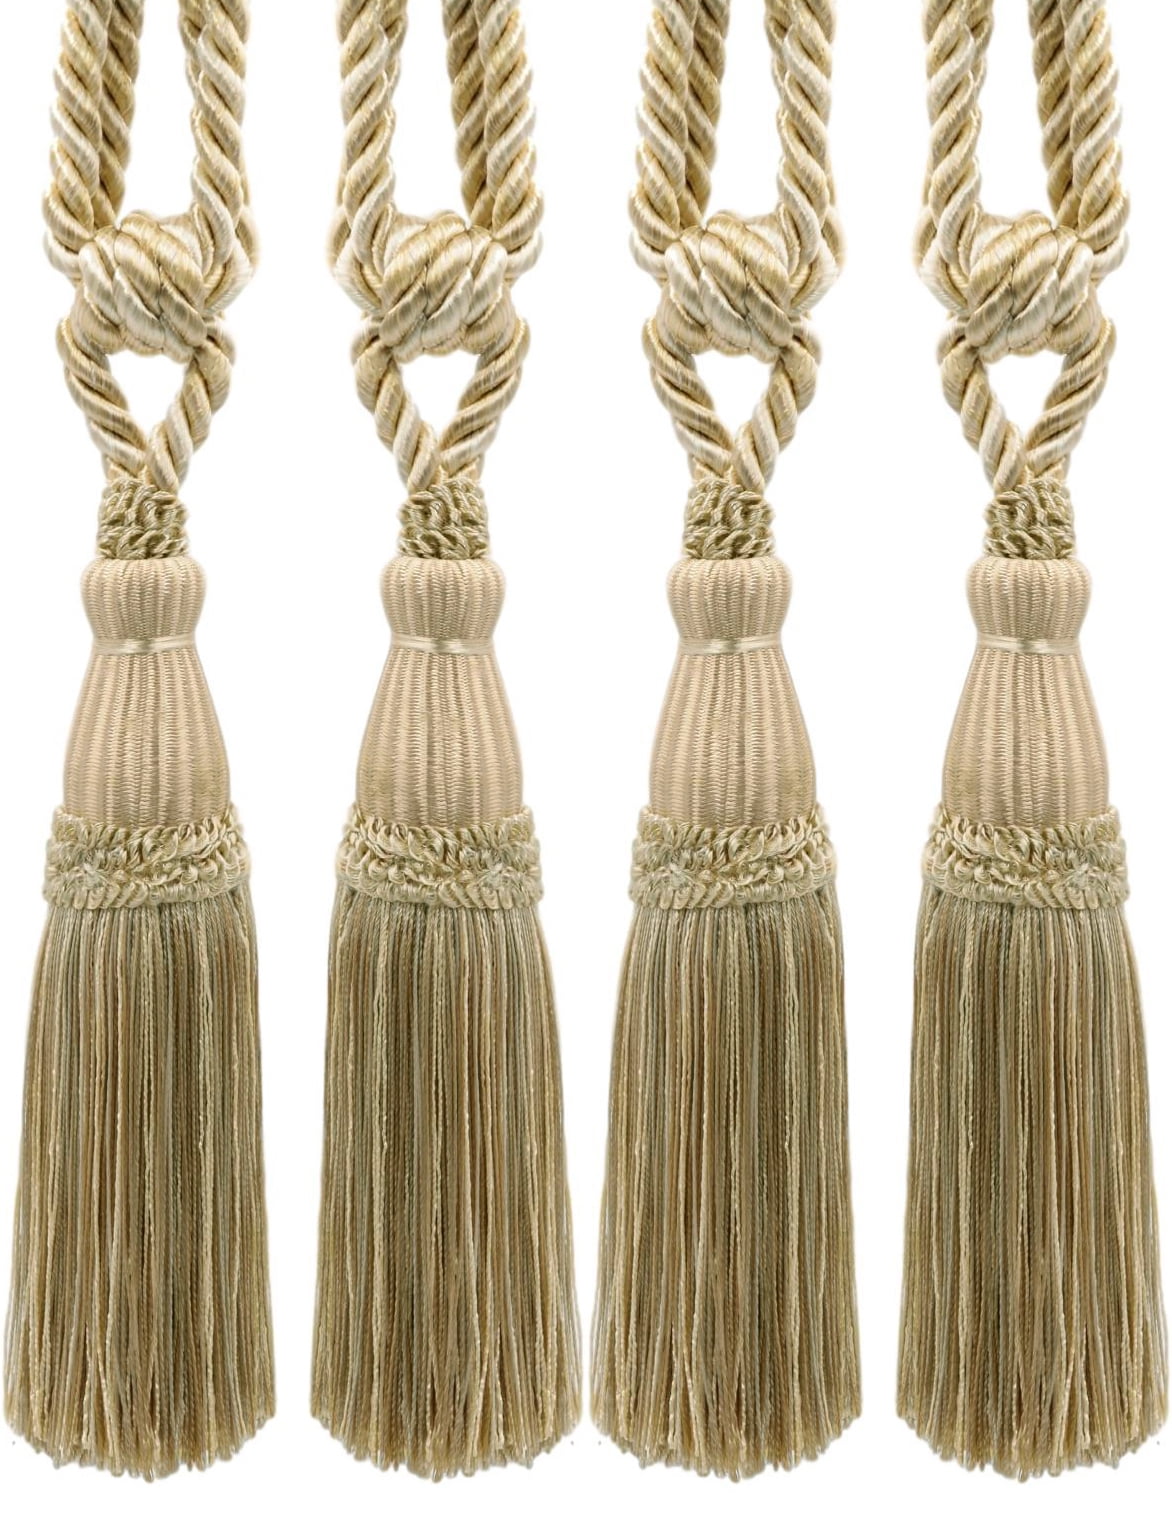 30"spread with 8"tassel 2 colors to choose from! Curtain& Chair Tie-Back 